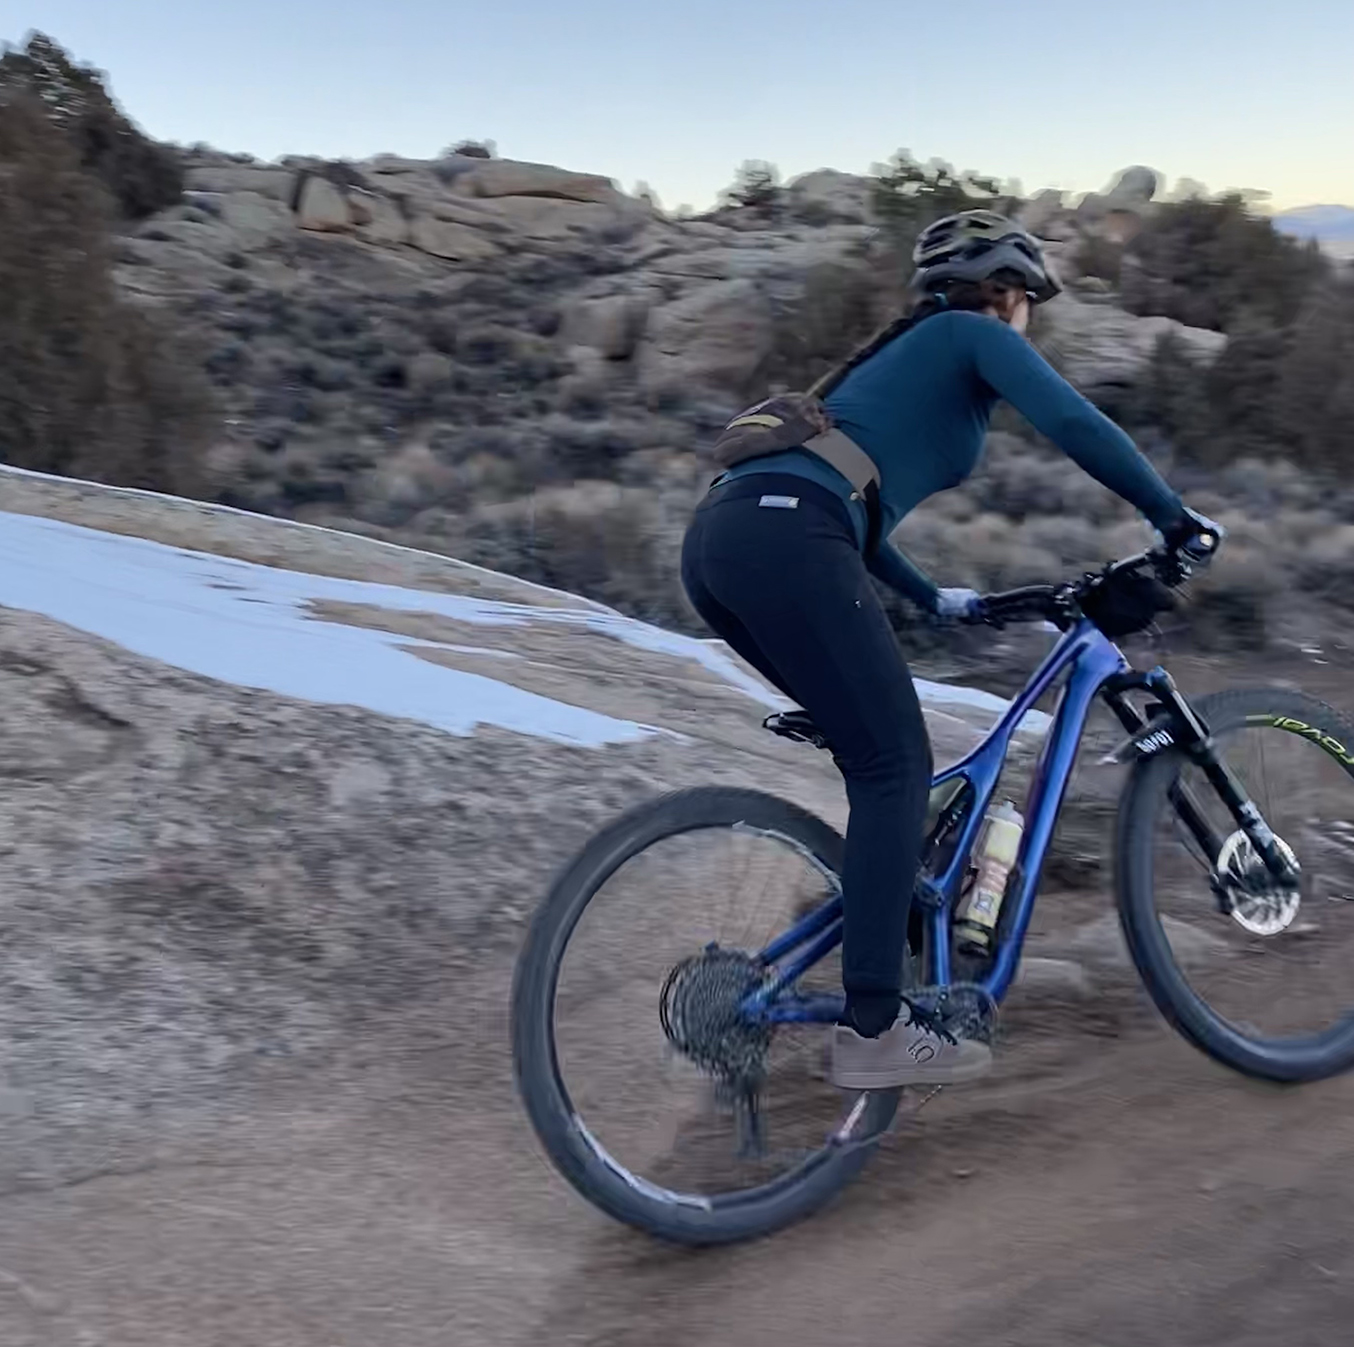 Fox Ranger Pants Review: Best for All-Around MTB Trail Riding